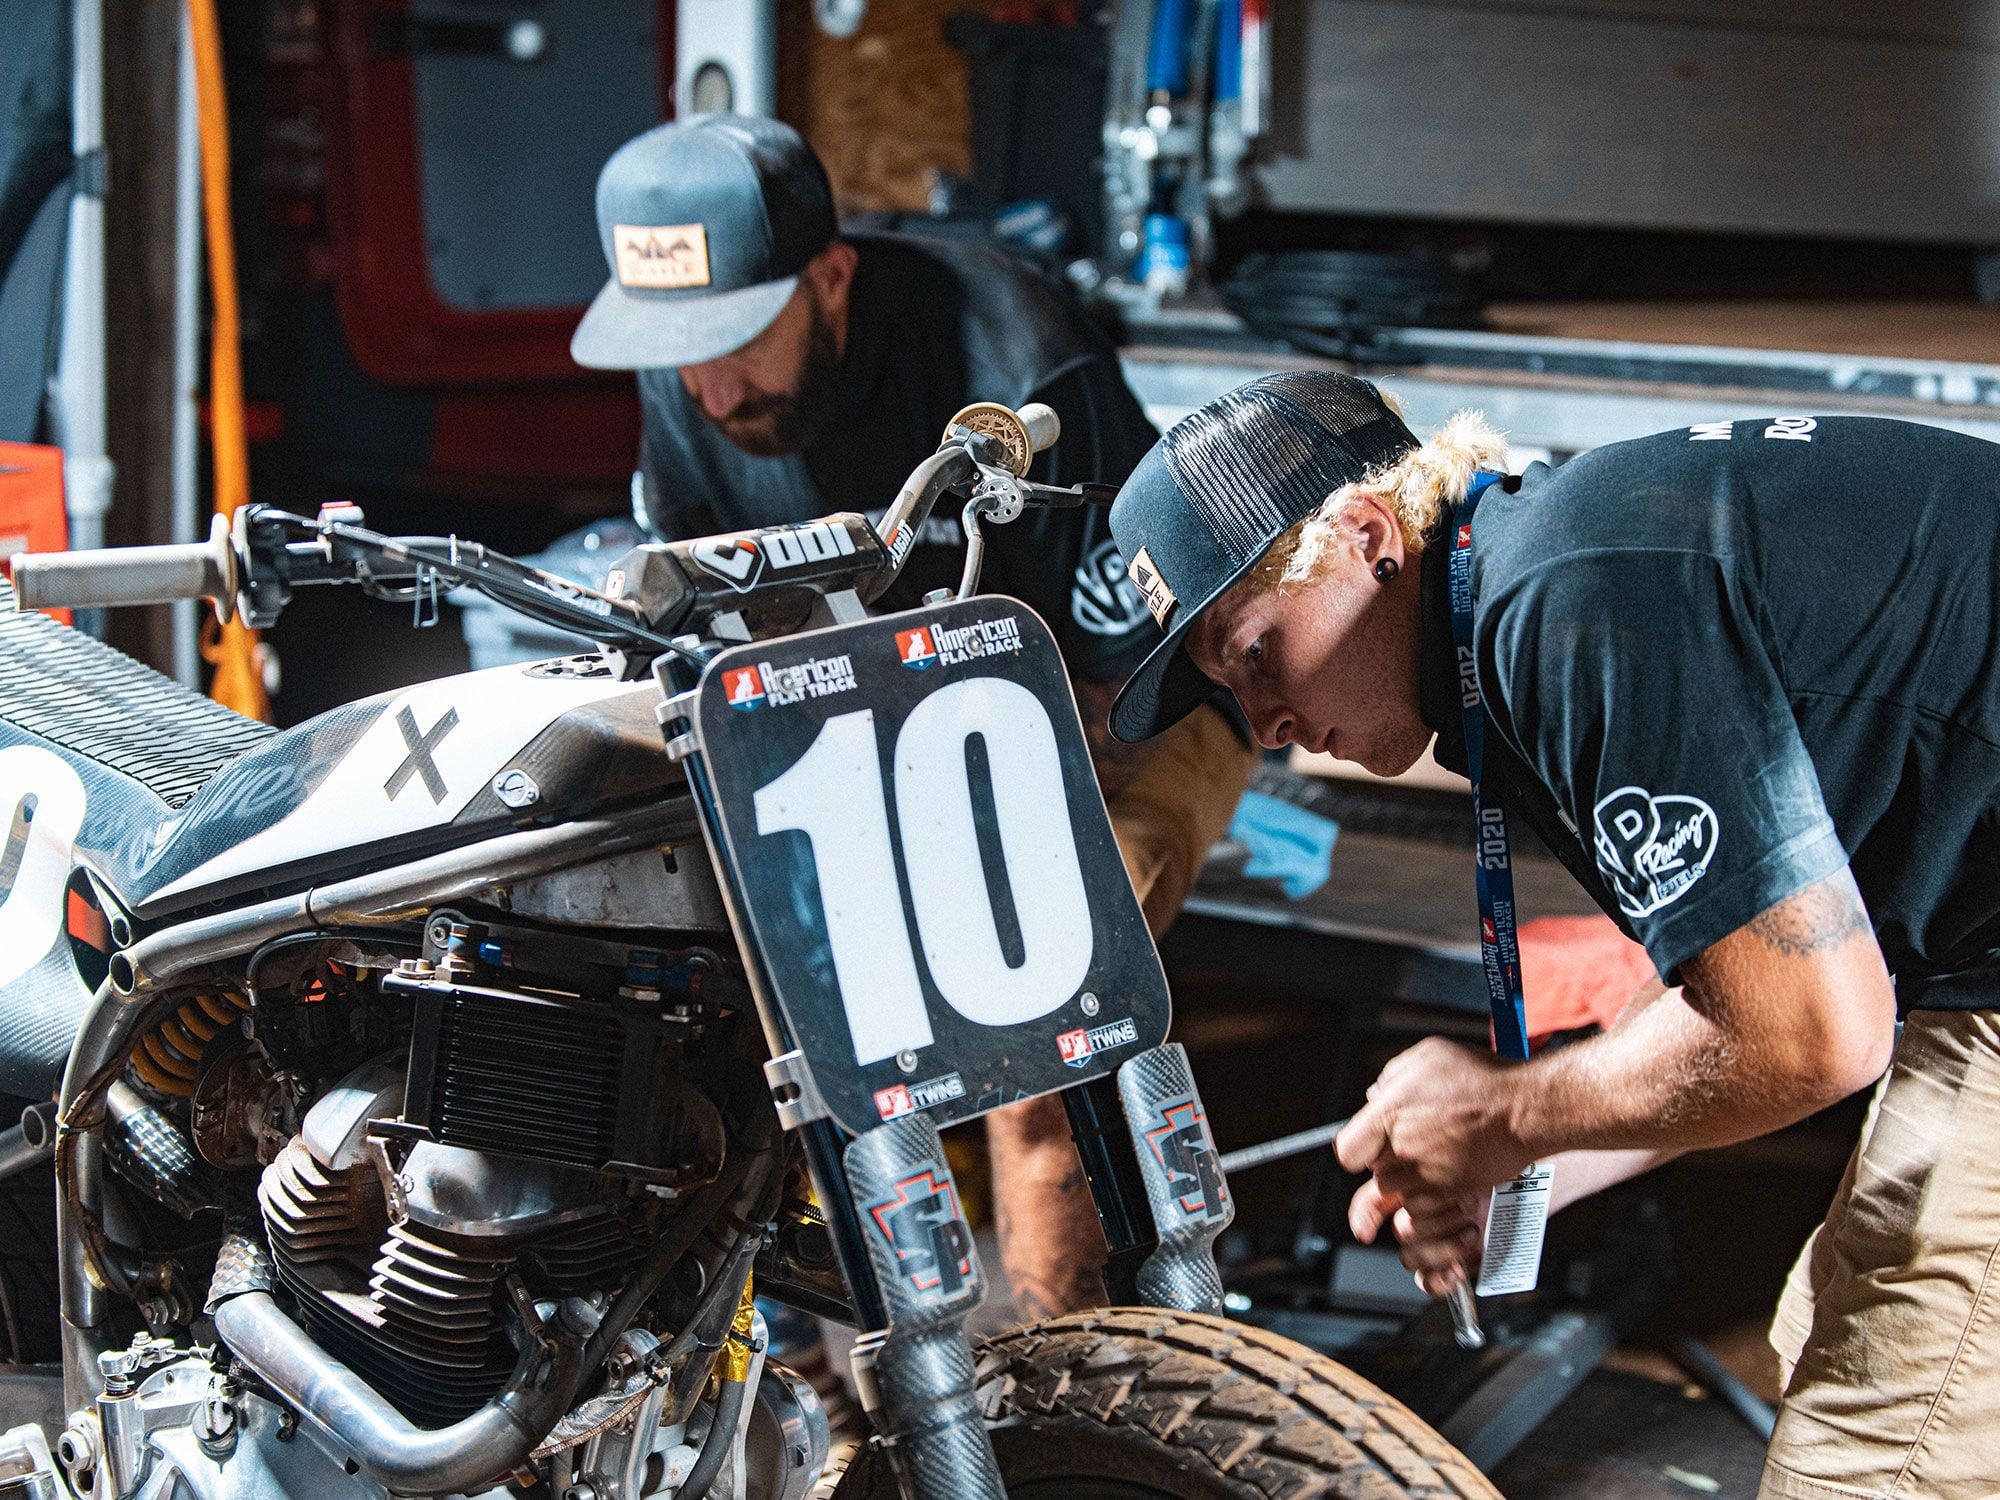 In dirt-track racing the traction changes as heats and semis roll by, so the bike’s settings have to change with it.